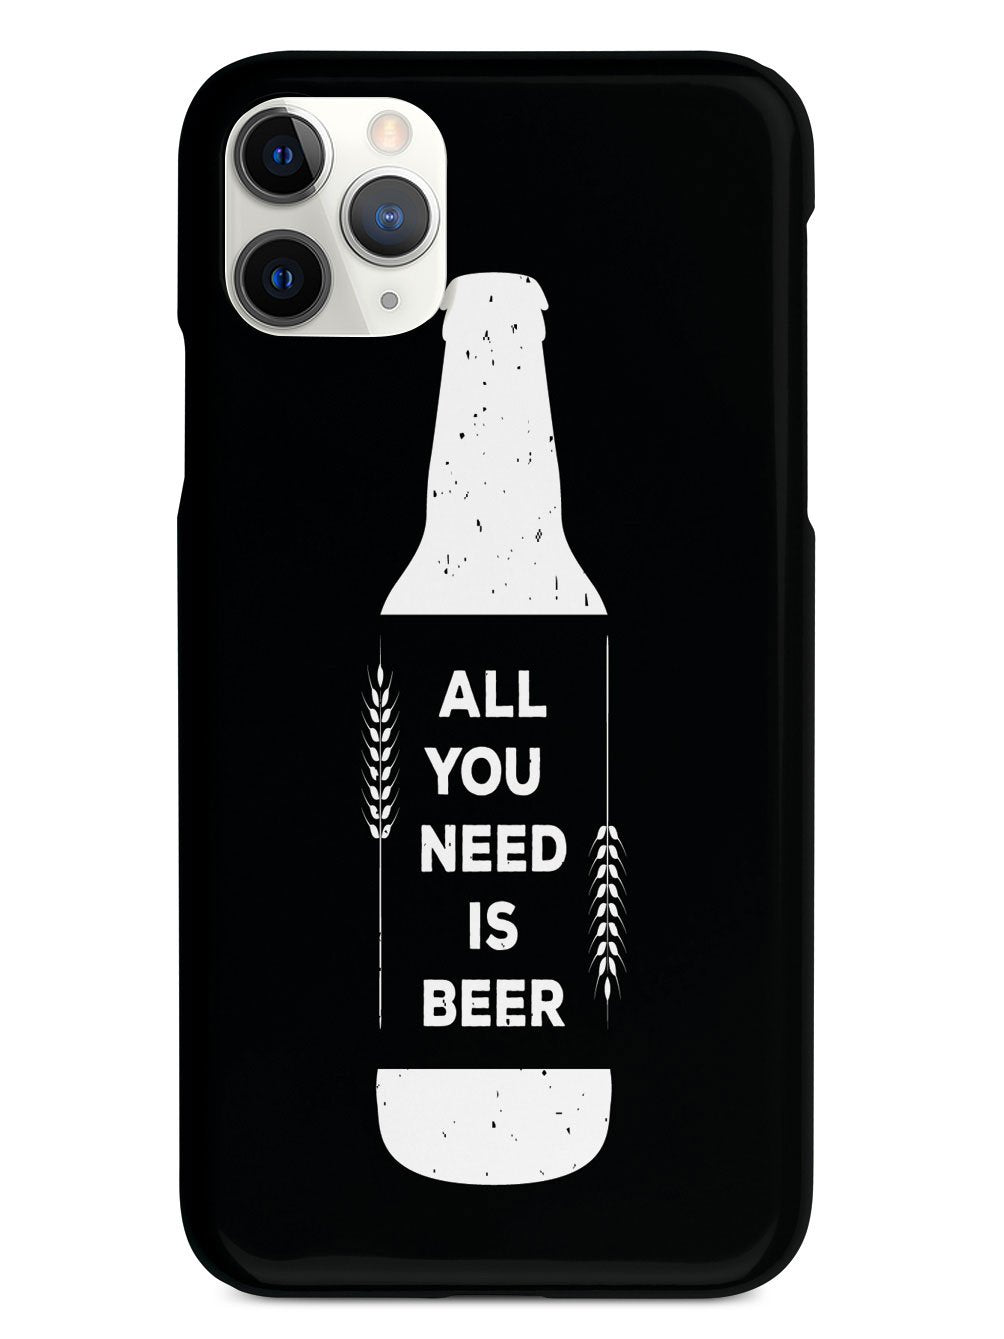 All You Need is Beer - Black Case